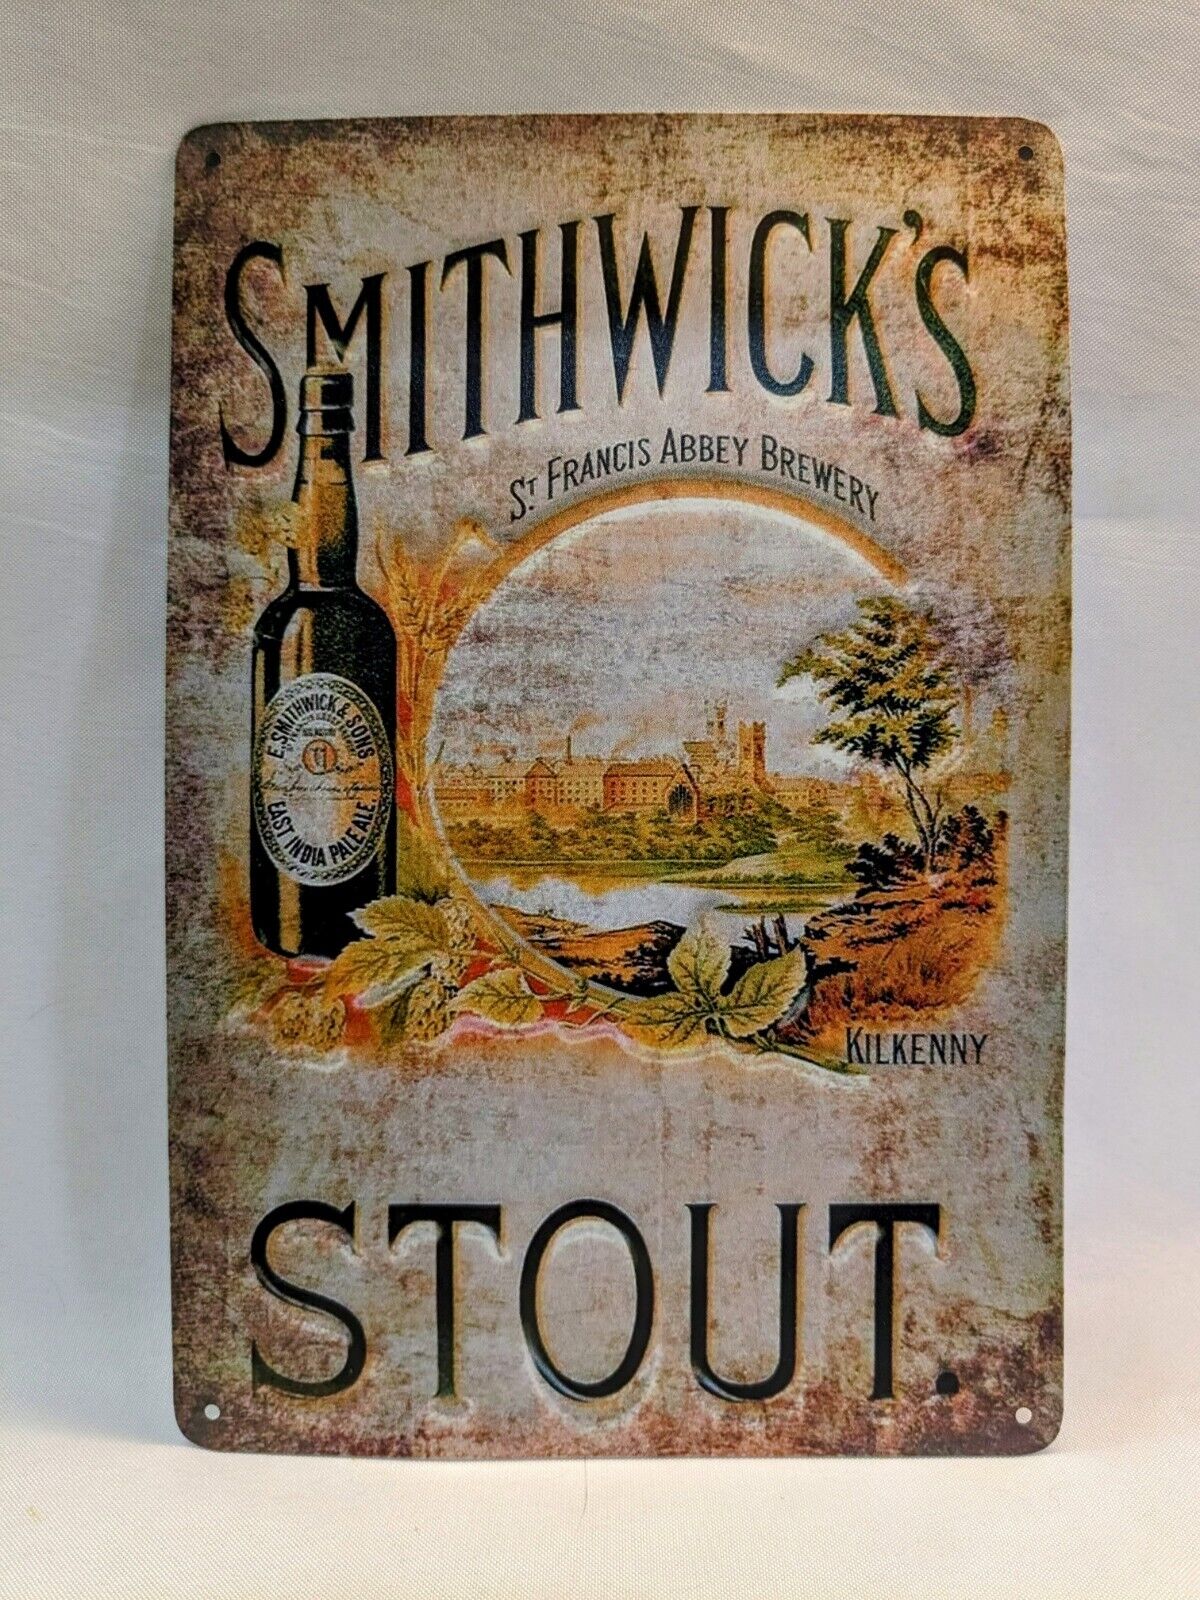 SMITHWICK'S IRISH BEER TIN SIGN RED ALE GUINNESS ST FRANCIS ABBEY IRELAND PUB 